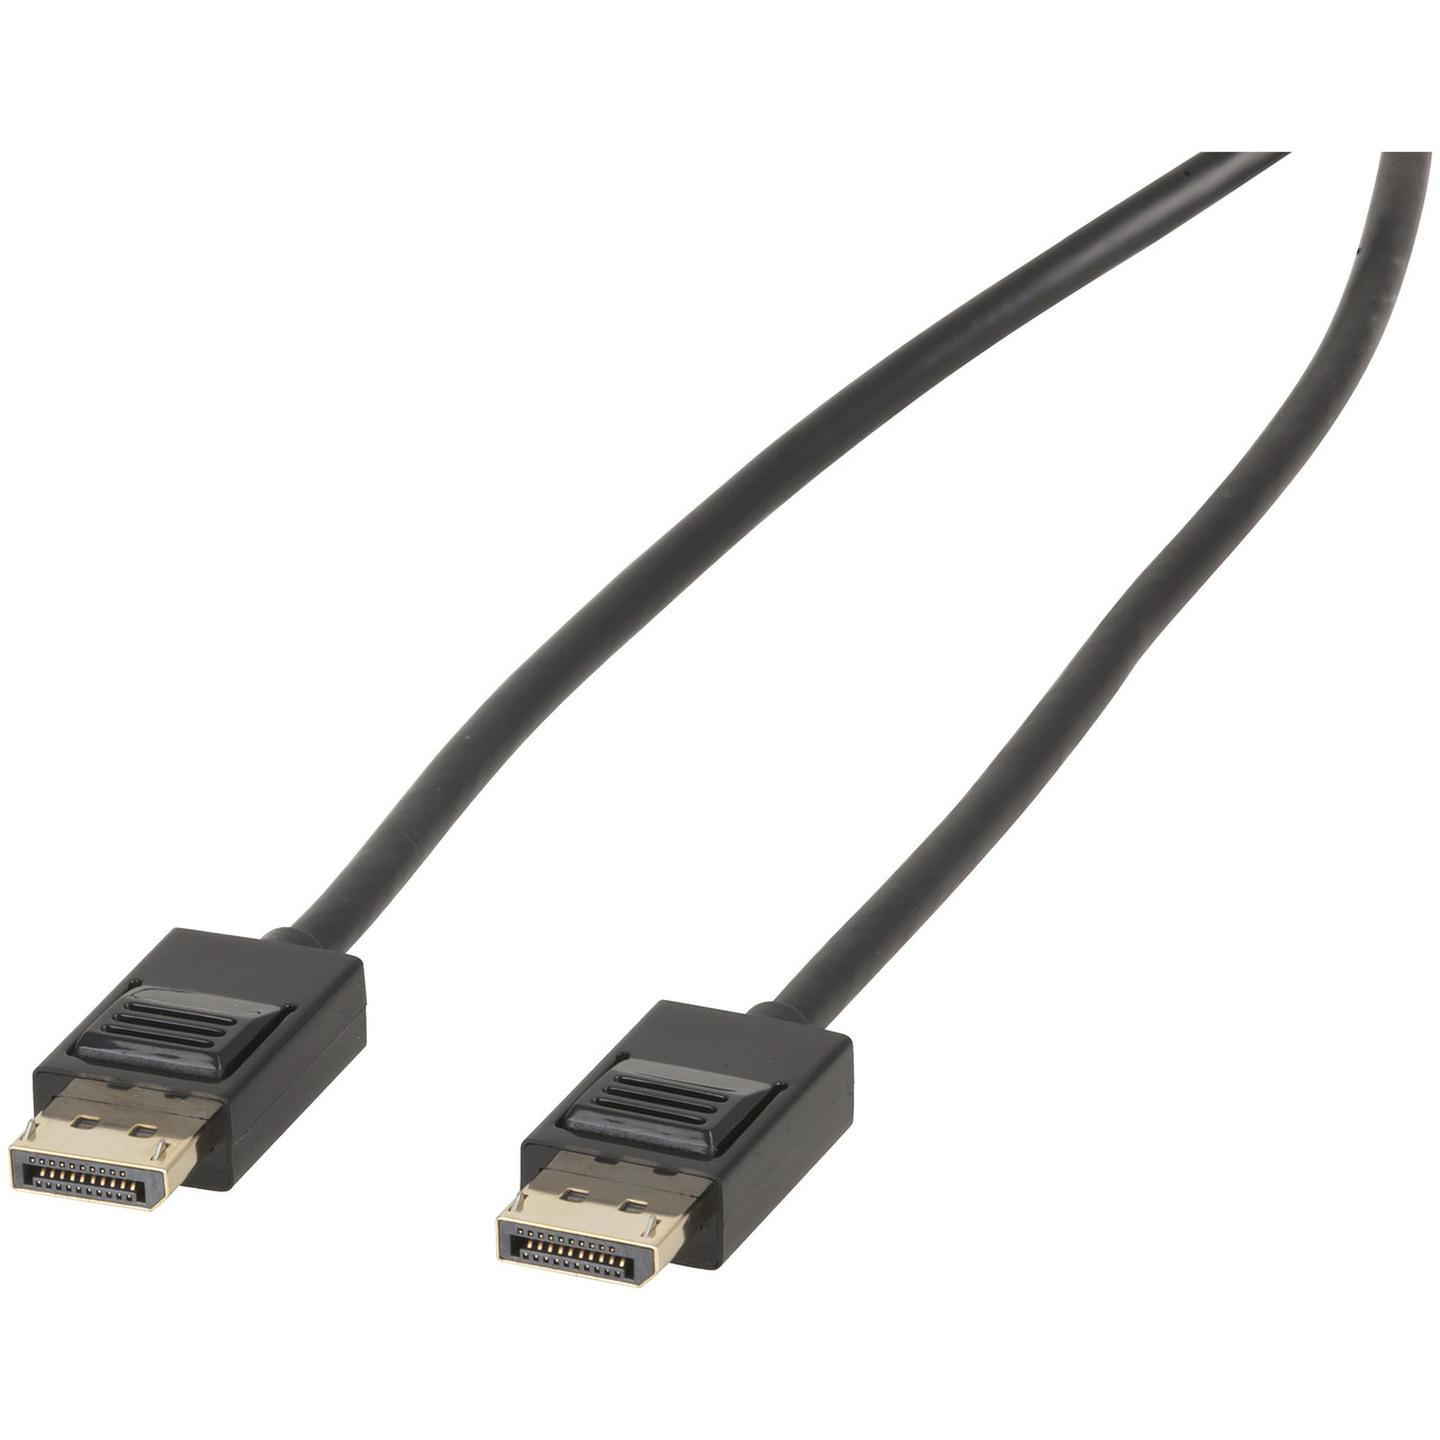 3m DisplayPort V1.4 Male to Male Cable